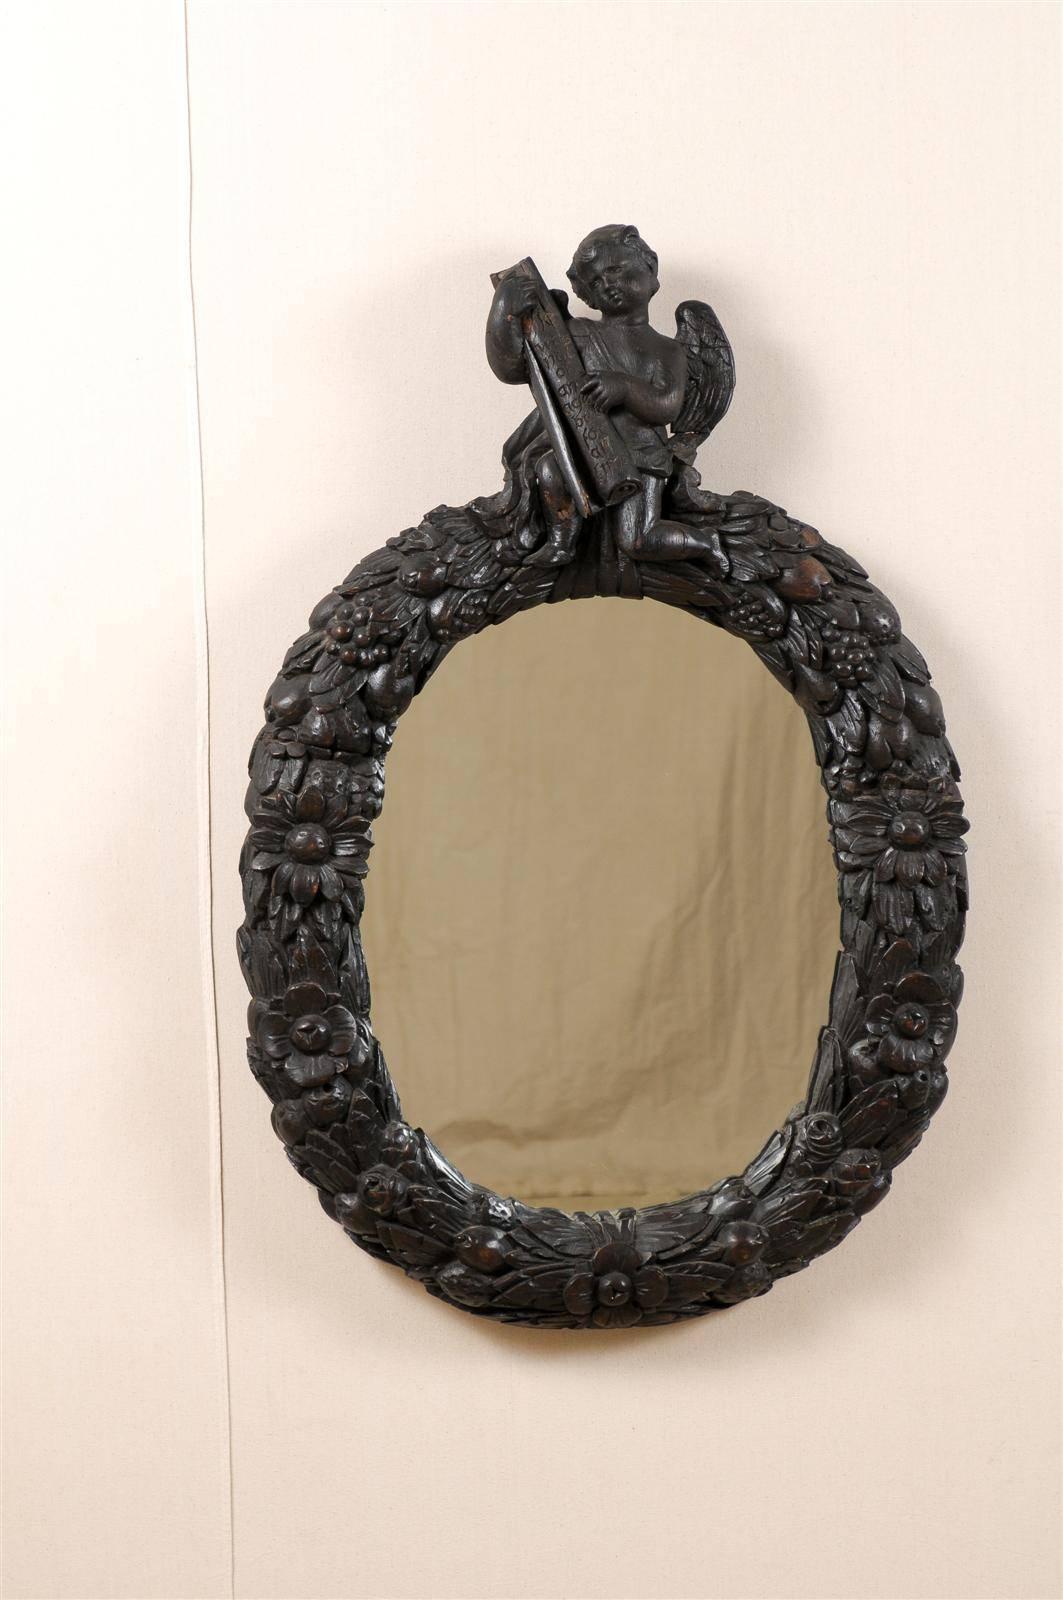 An 18th century English medium sized oval mirror. This English wall mirror has a carved wood crest featuring an angel holding a manuscript. The frame depicts a wreath of floral and fruit motifs.  This piece is a rich dark brown, almost black color